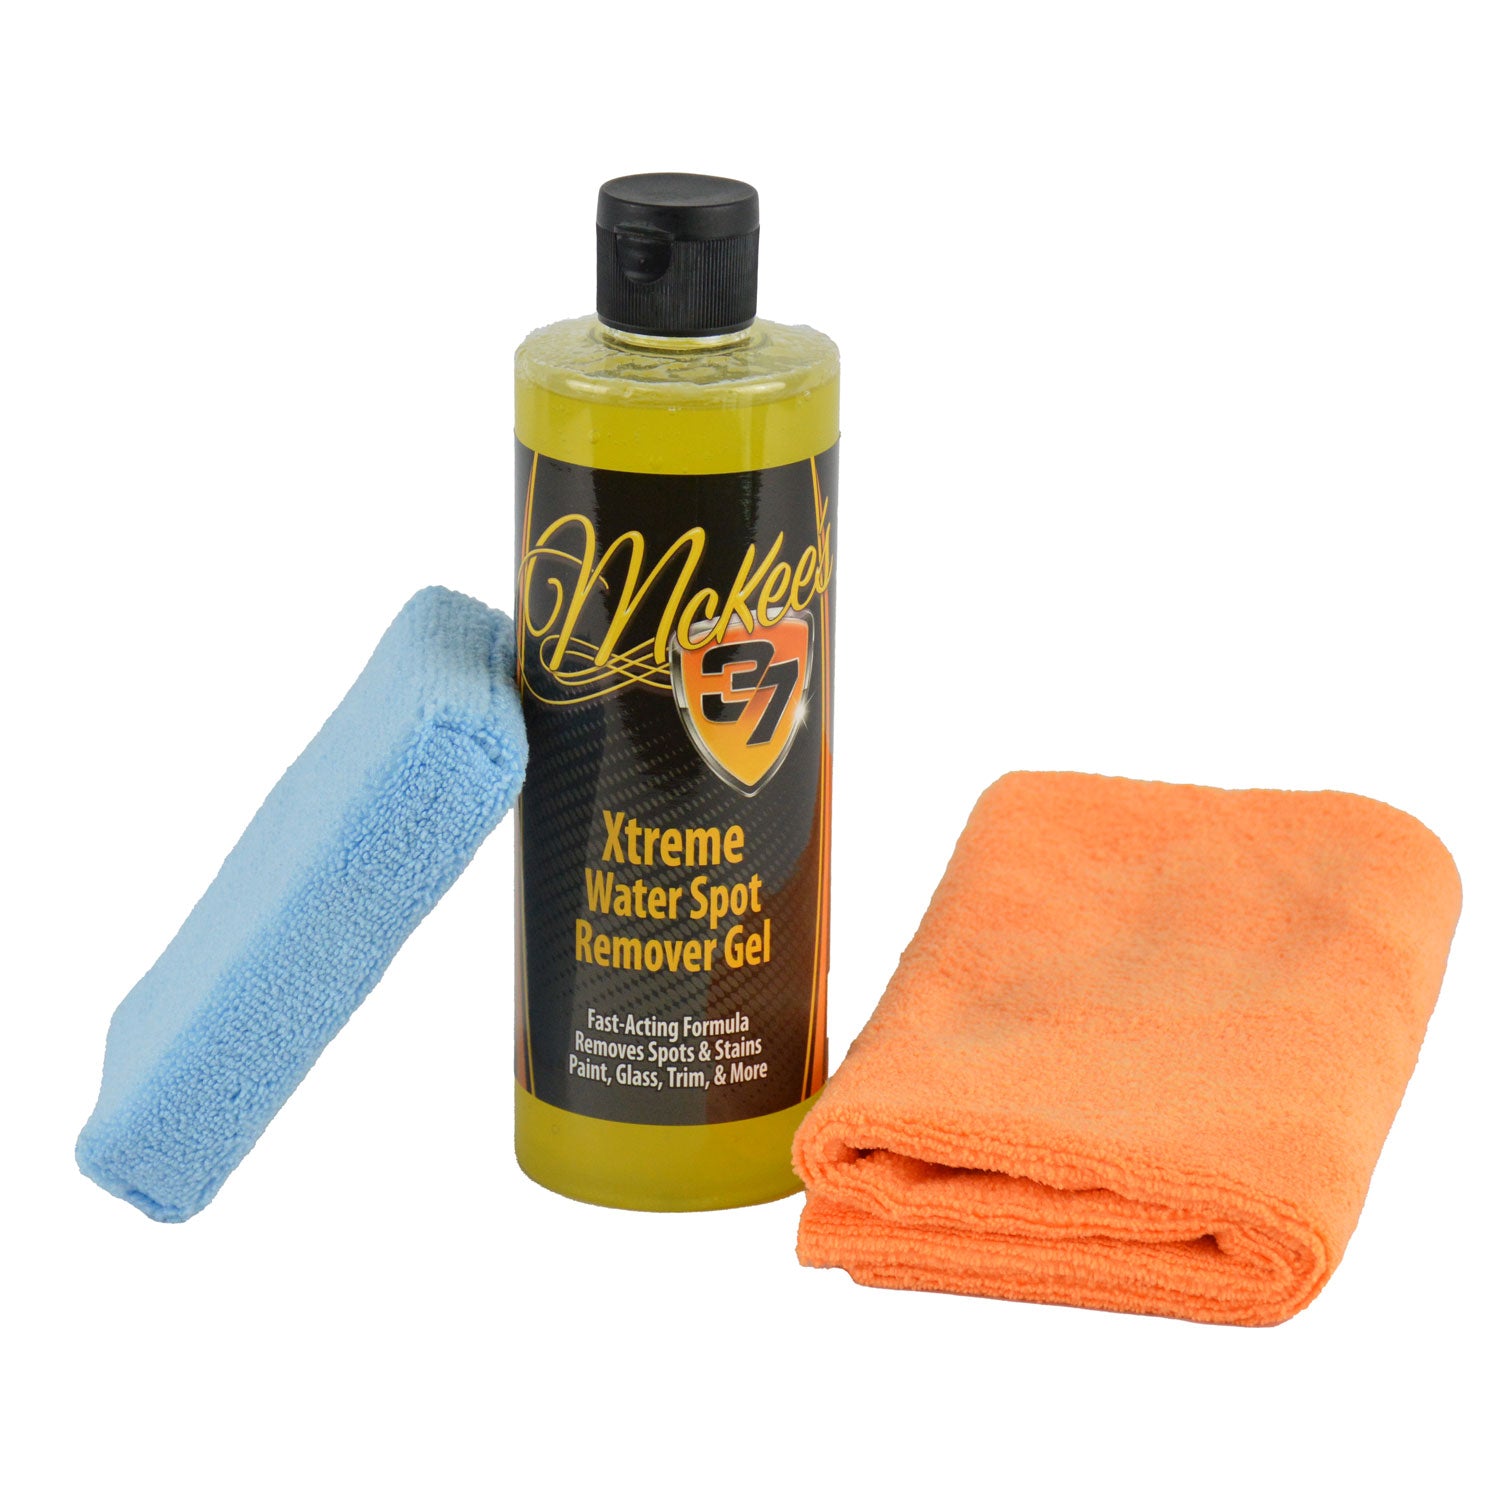 Xtreme Water Spot Remover Gel - INCLUDES TOWEL & APPLICATOR